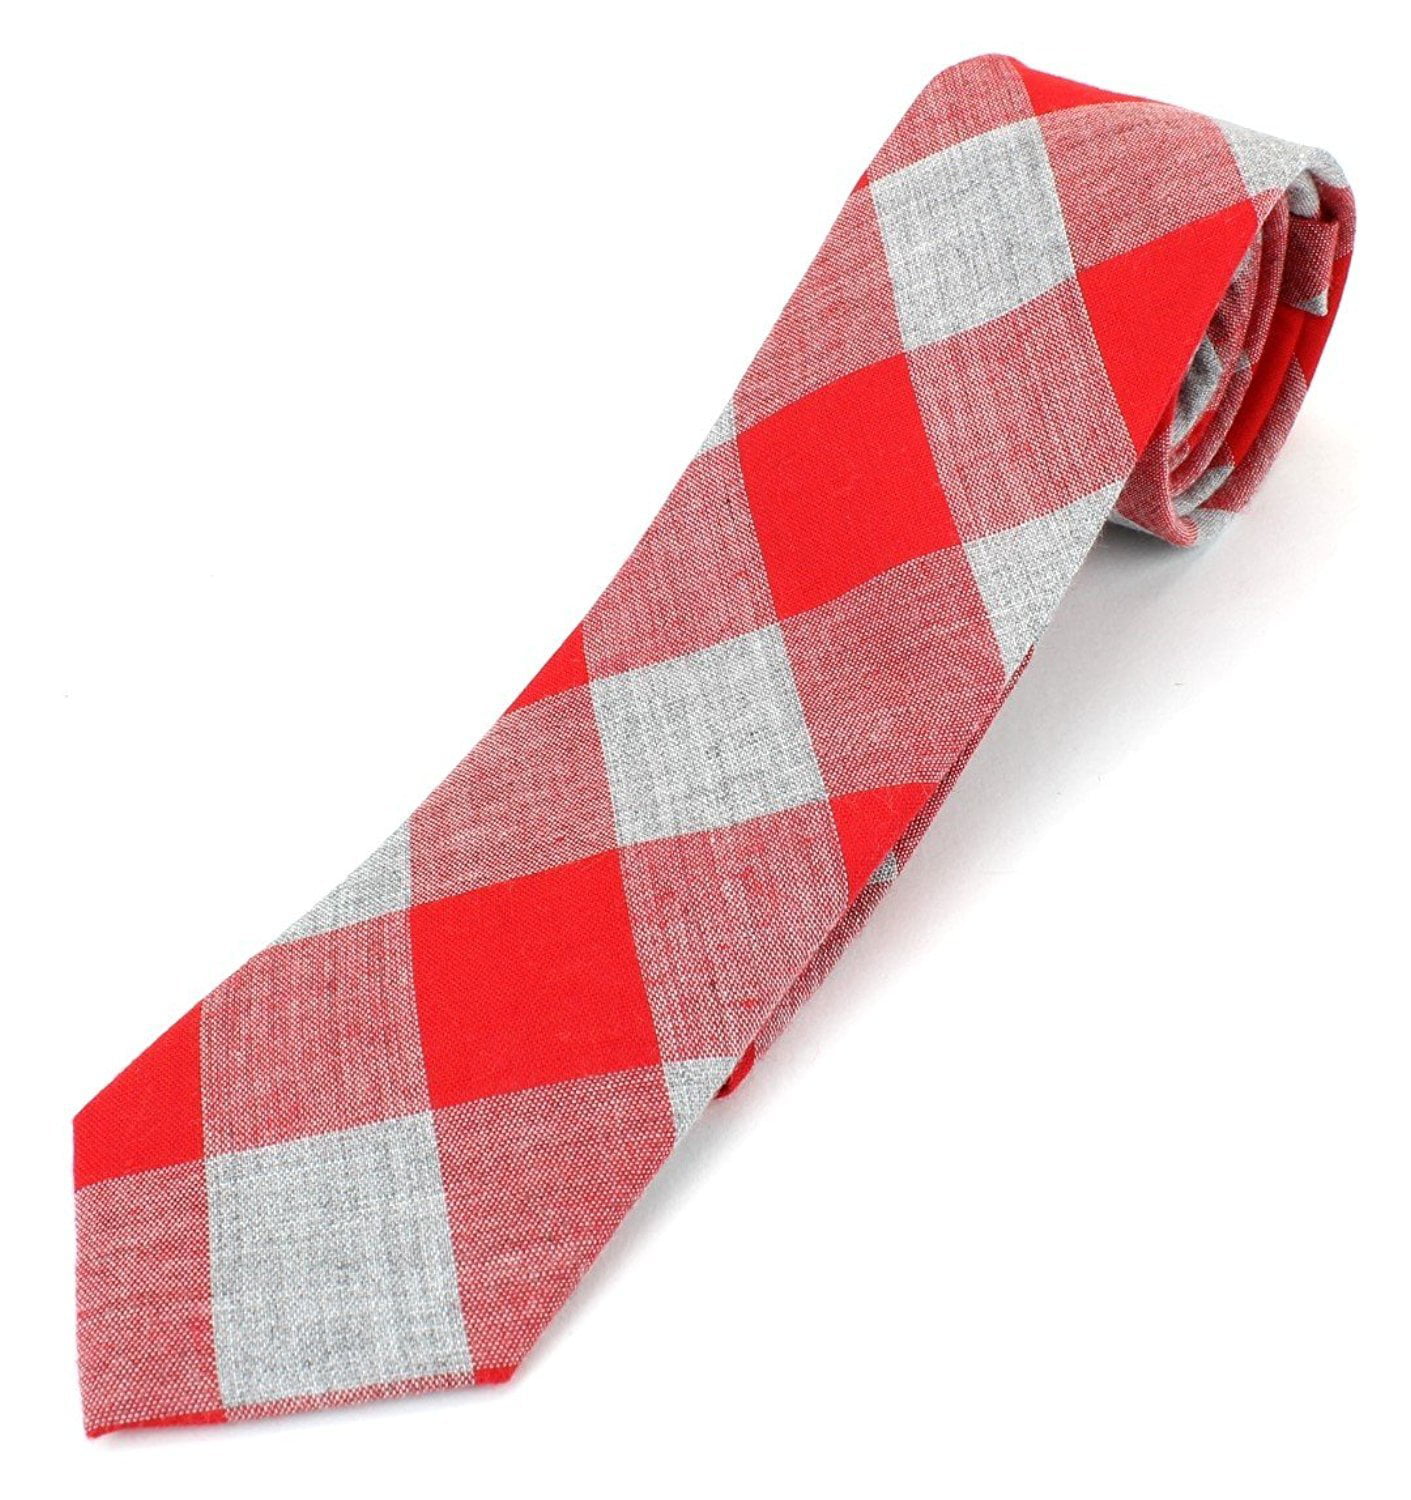 Details about  / Men/'s Cotton Skinny Necktie Tie Checker Large Gingham Pattern Grey Backing Color